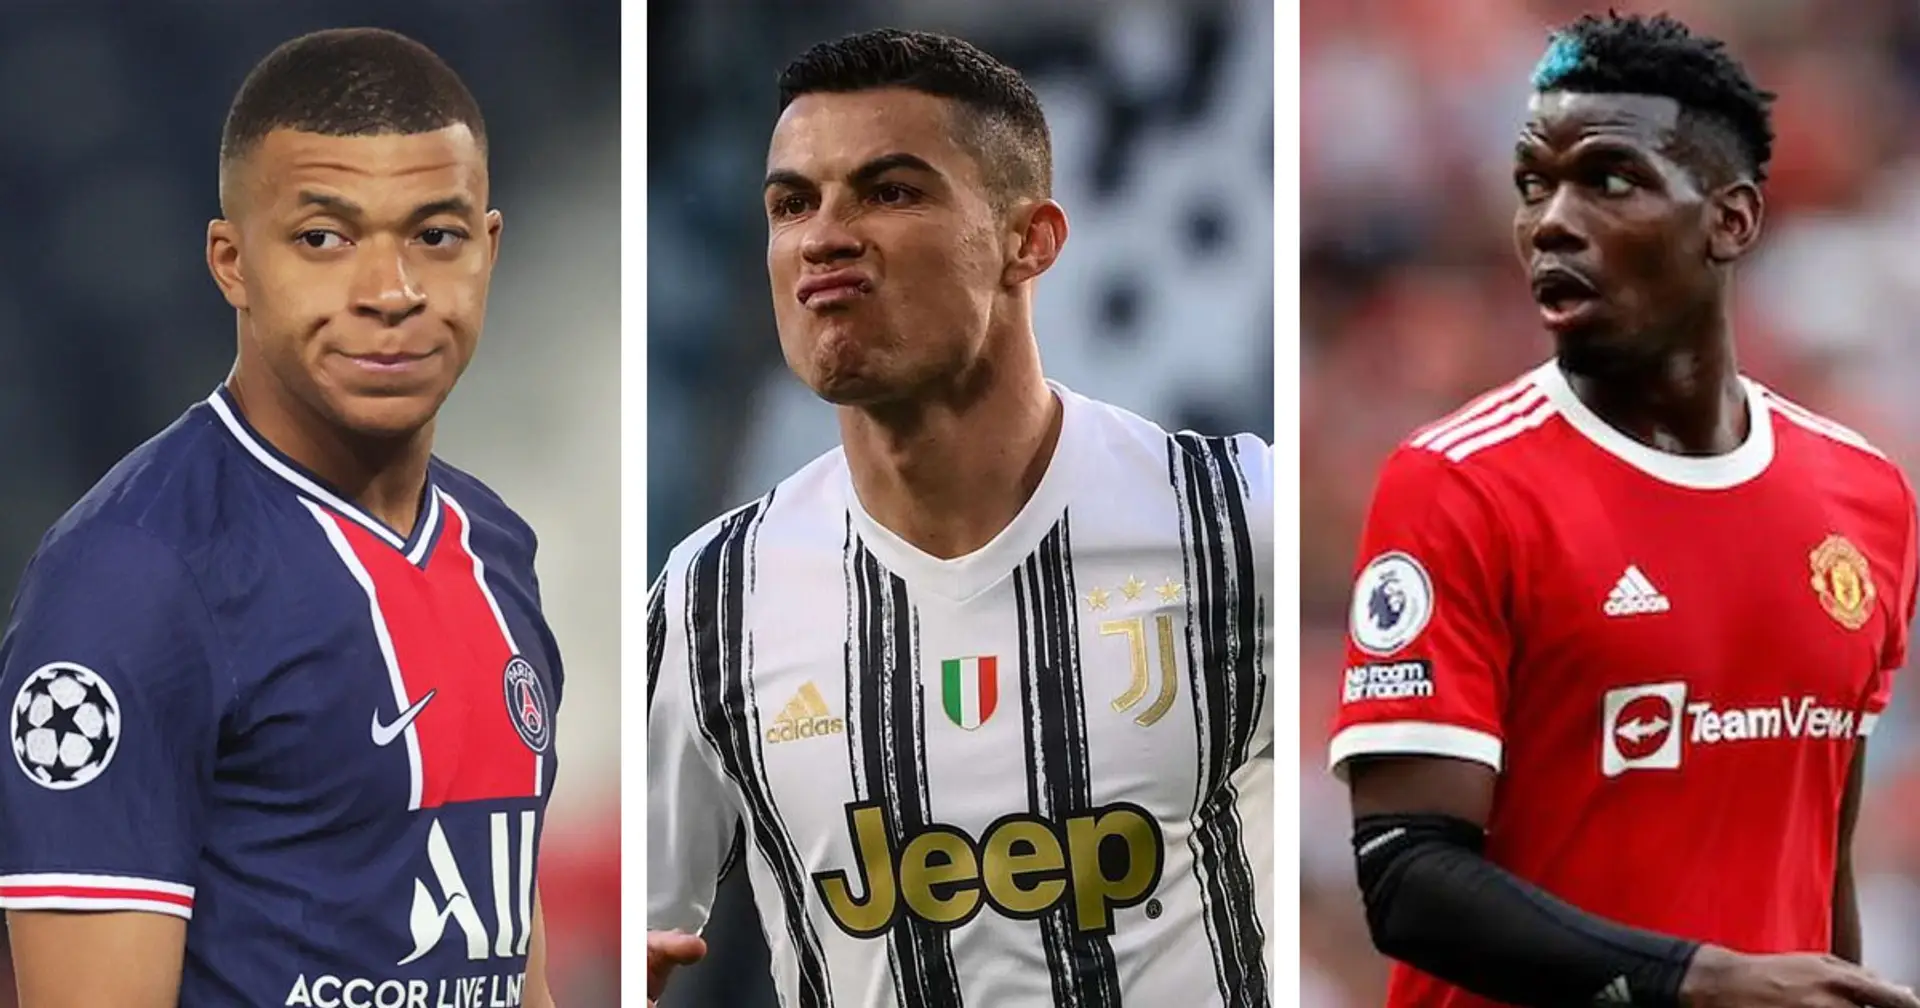 Mbappe, Ronaldo & more: 8 names in PSG's transfer round-up with probability ratings